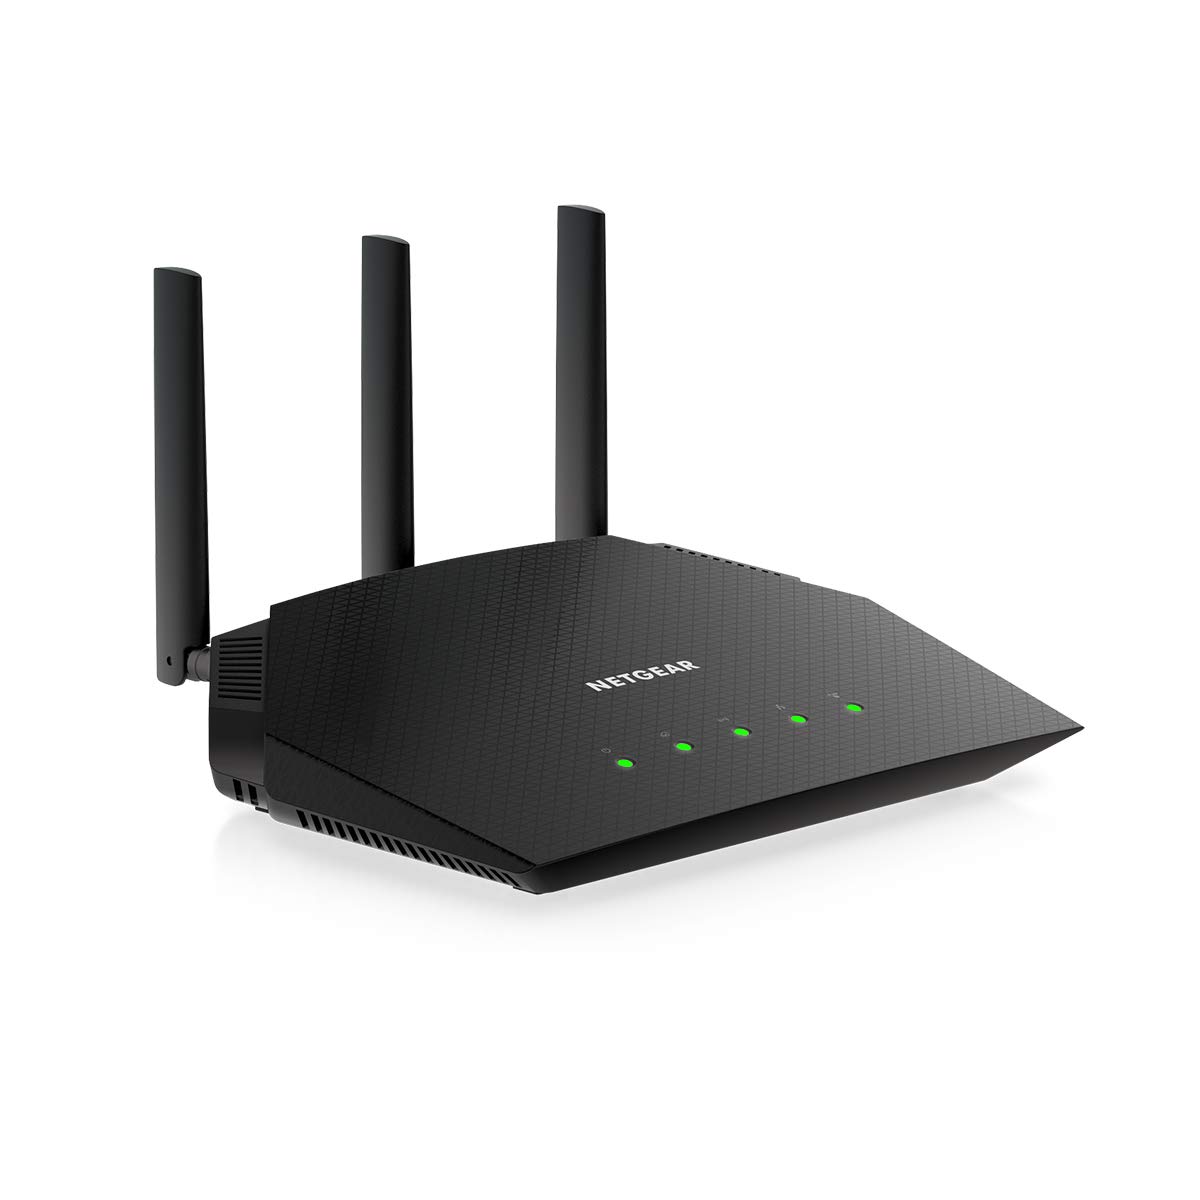 Mua NETGEAR 4-Stream WiFi 6 Router (R6700AX) – AX1800 Wireless Speed (Up to   Gbps) | Coverage up to 1,500 sq. ft., 20 devices trên Amazon Mỹ chính  hãng 2023 | Giaonhan247